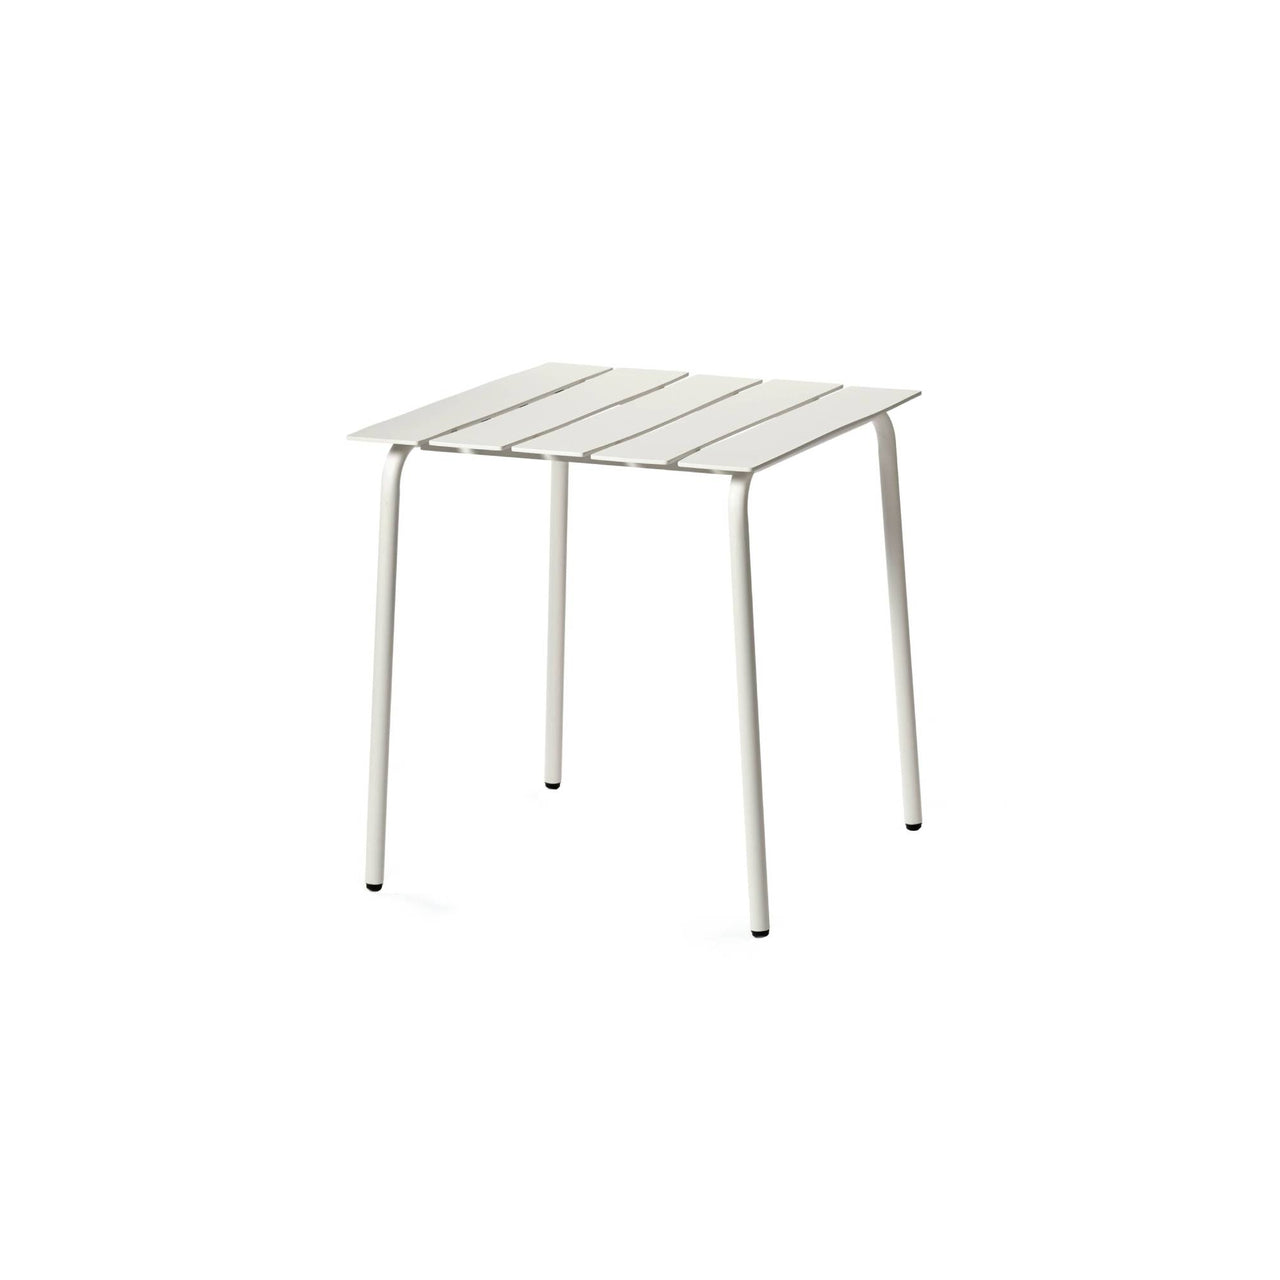 Aligned Outdoor Dining Table: Square + Off-White